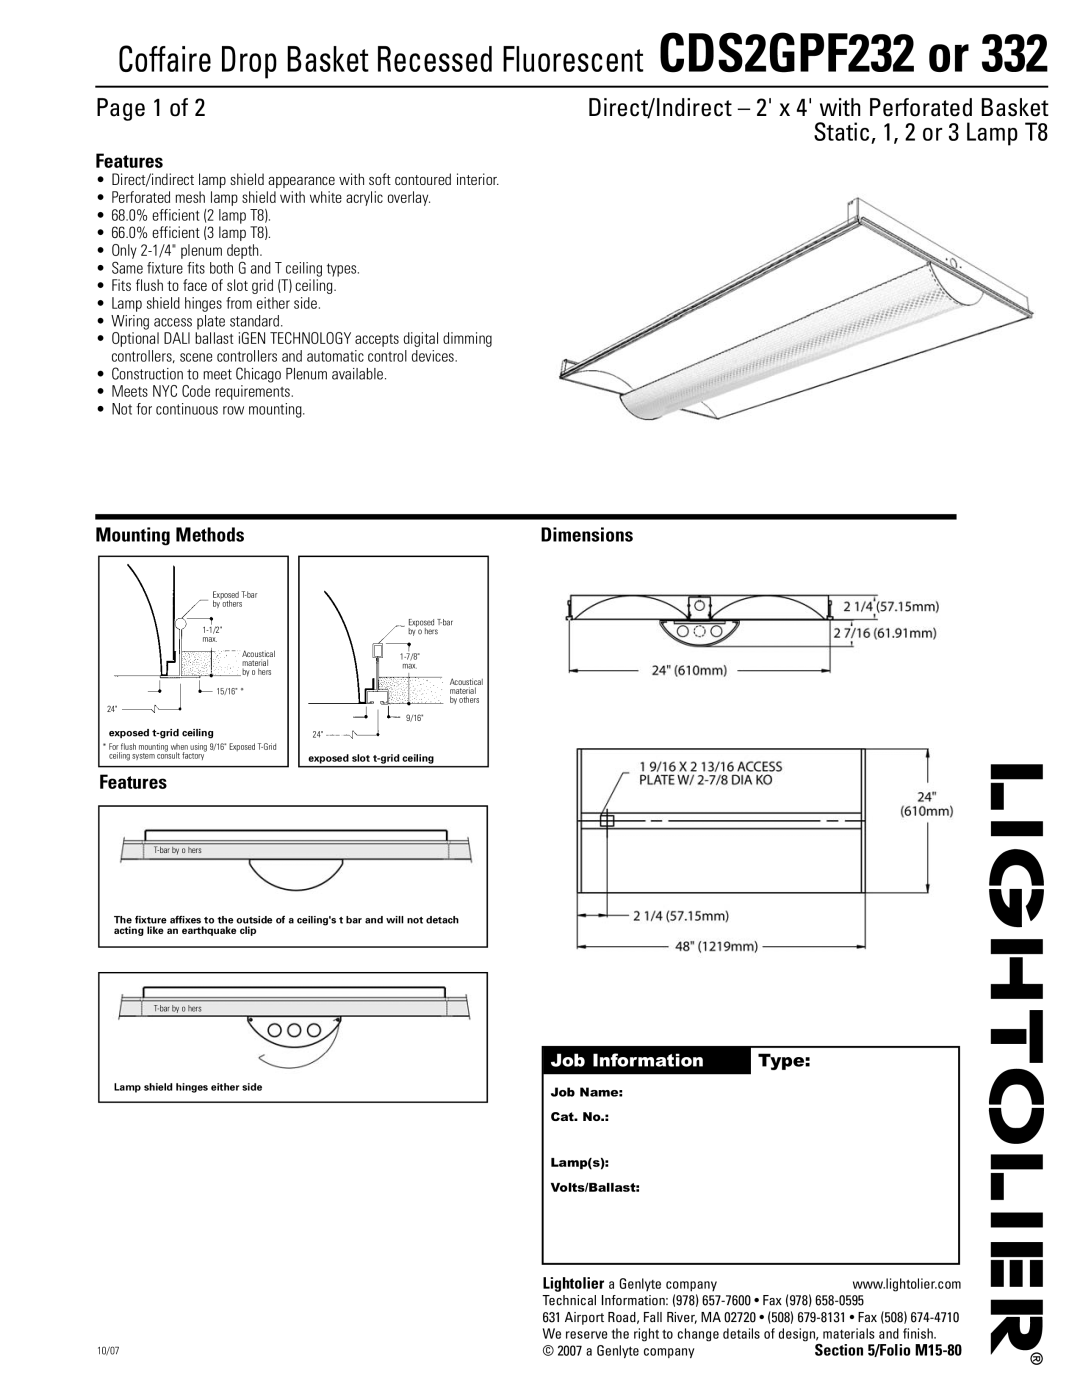 Lightolier CDS2GPF232 or 332 dimensions Page 1 of, Features, Mounting Methods, Dimensions, Job Information, Type 